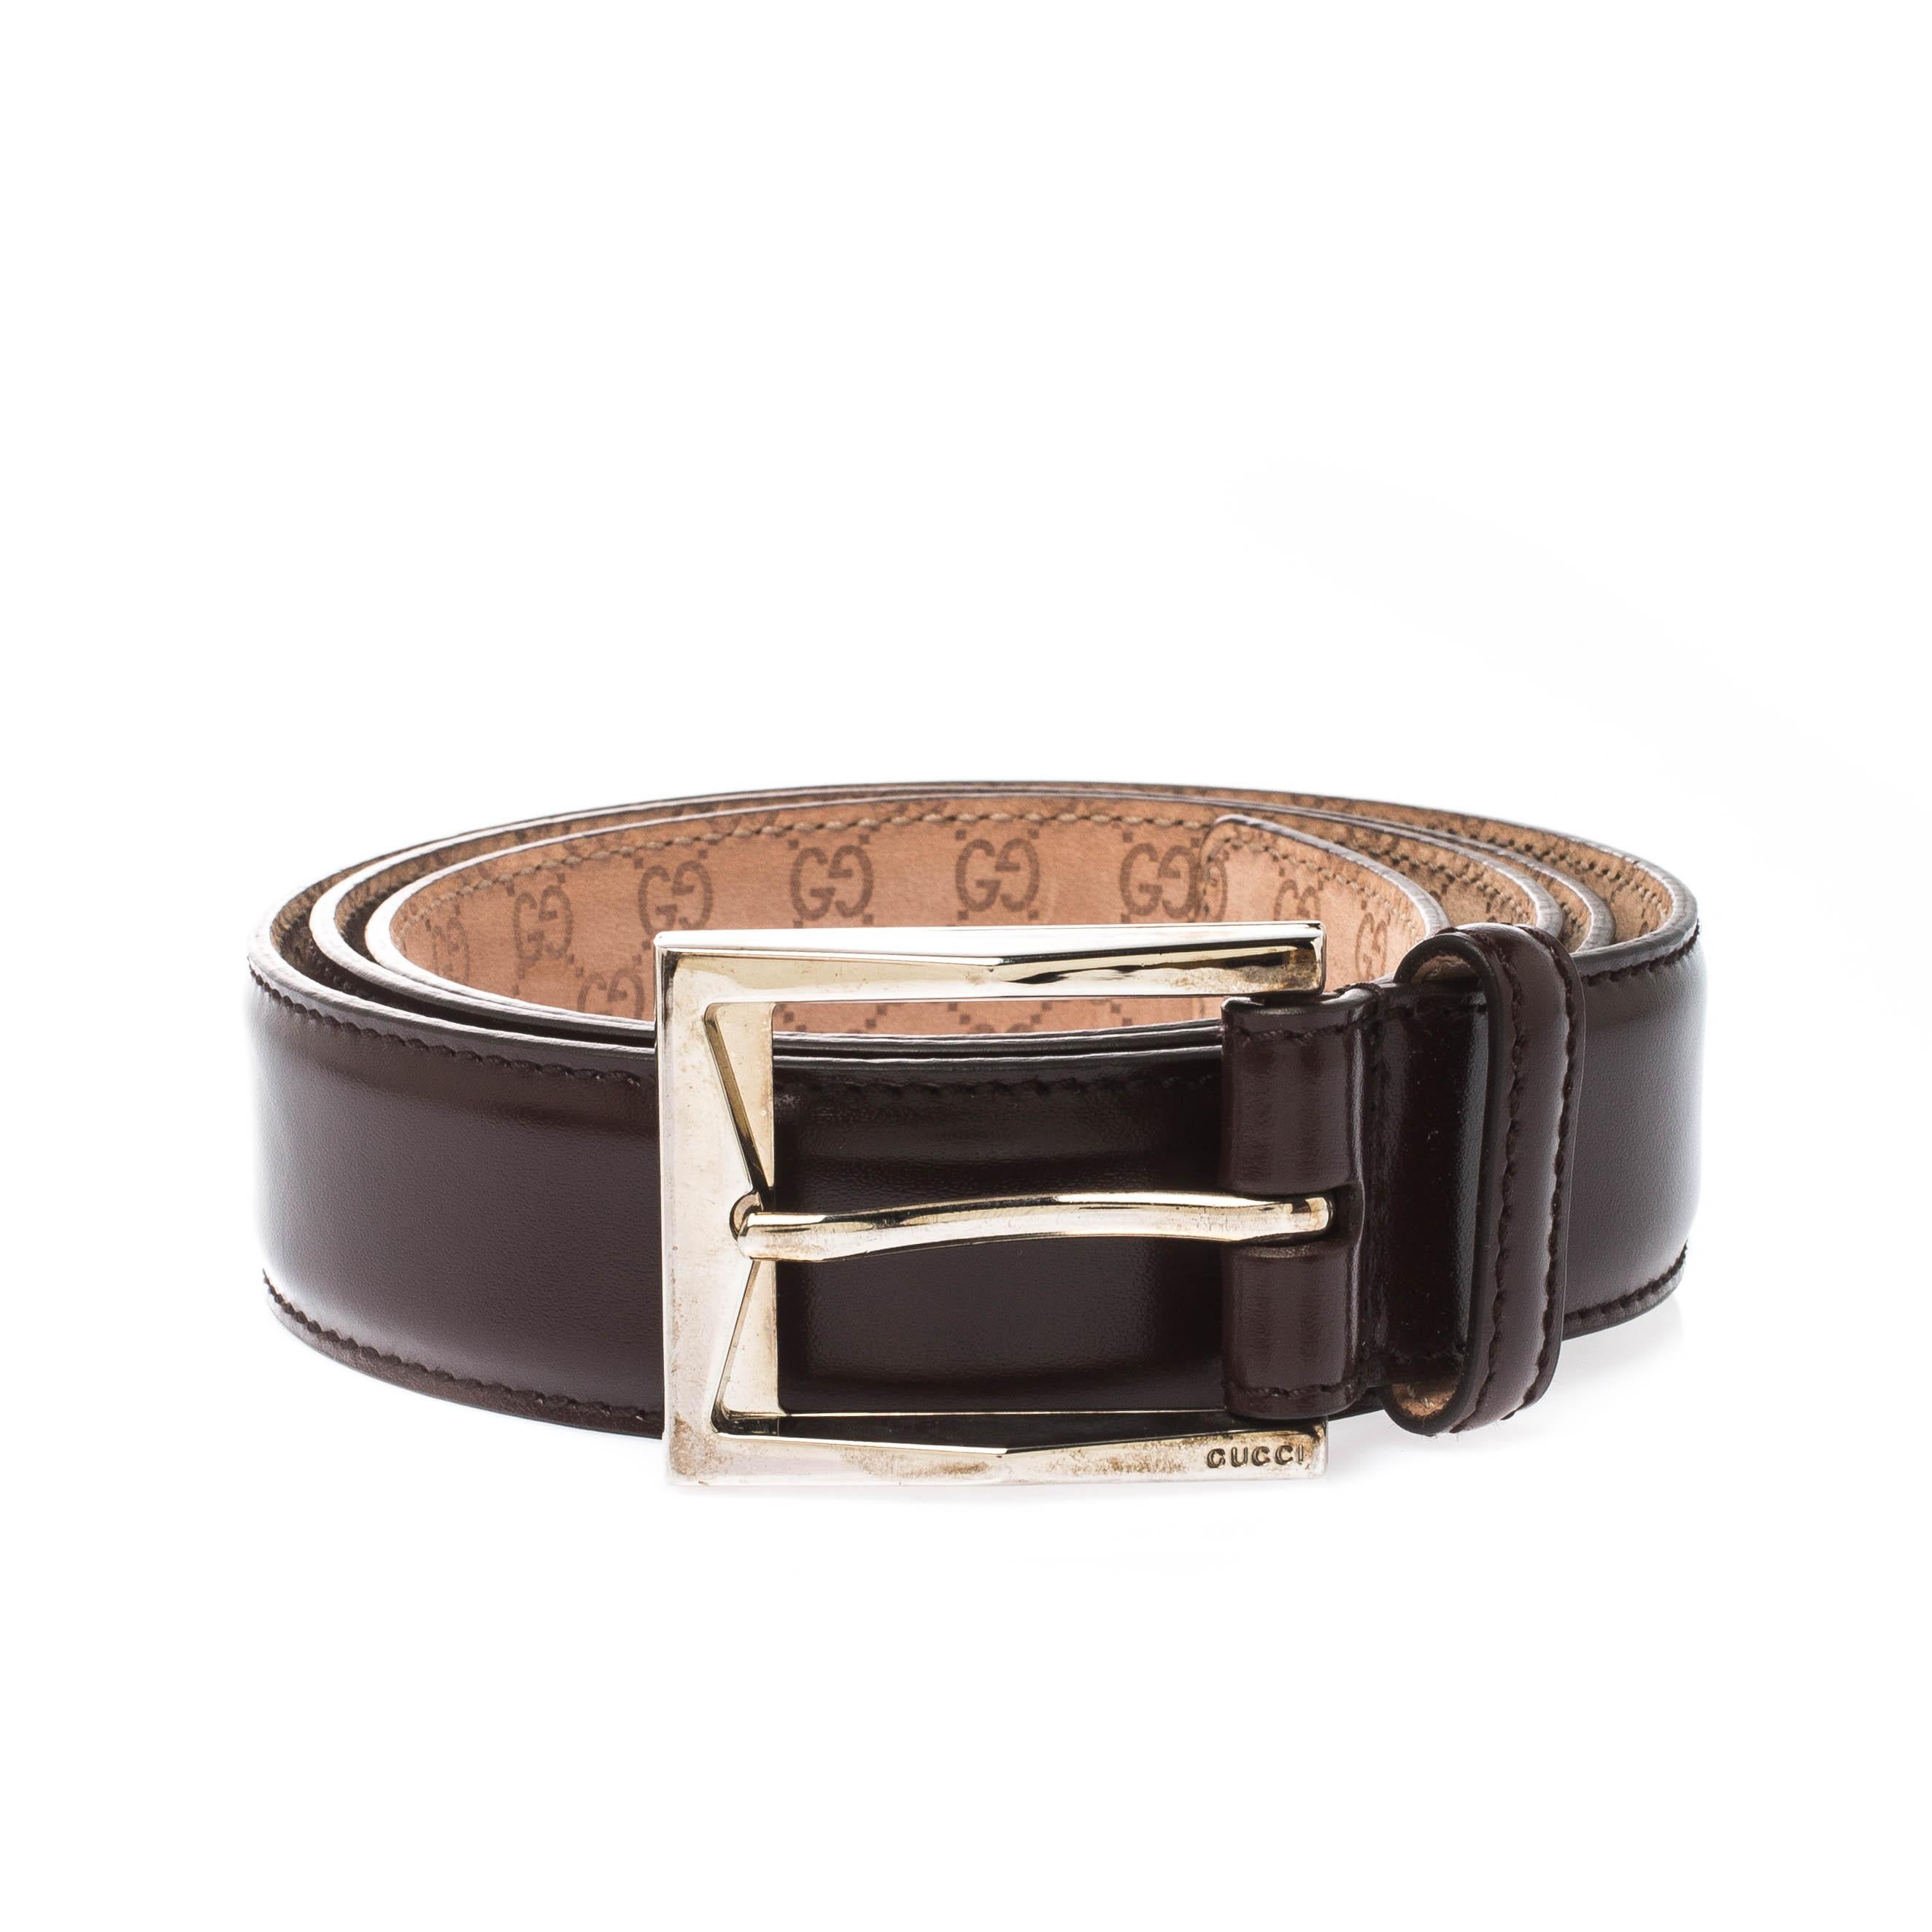 Add the luxury touch to your accessory collection with this brown buckle belt from Gucci. It comes made from leather and designed with a pin buckle in silver-tone metal. Grab it right away!

Includes: Original Dustbag, Original Box

